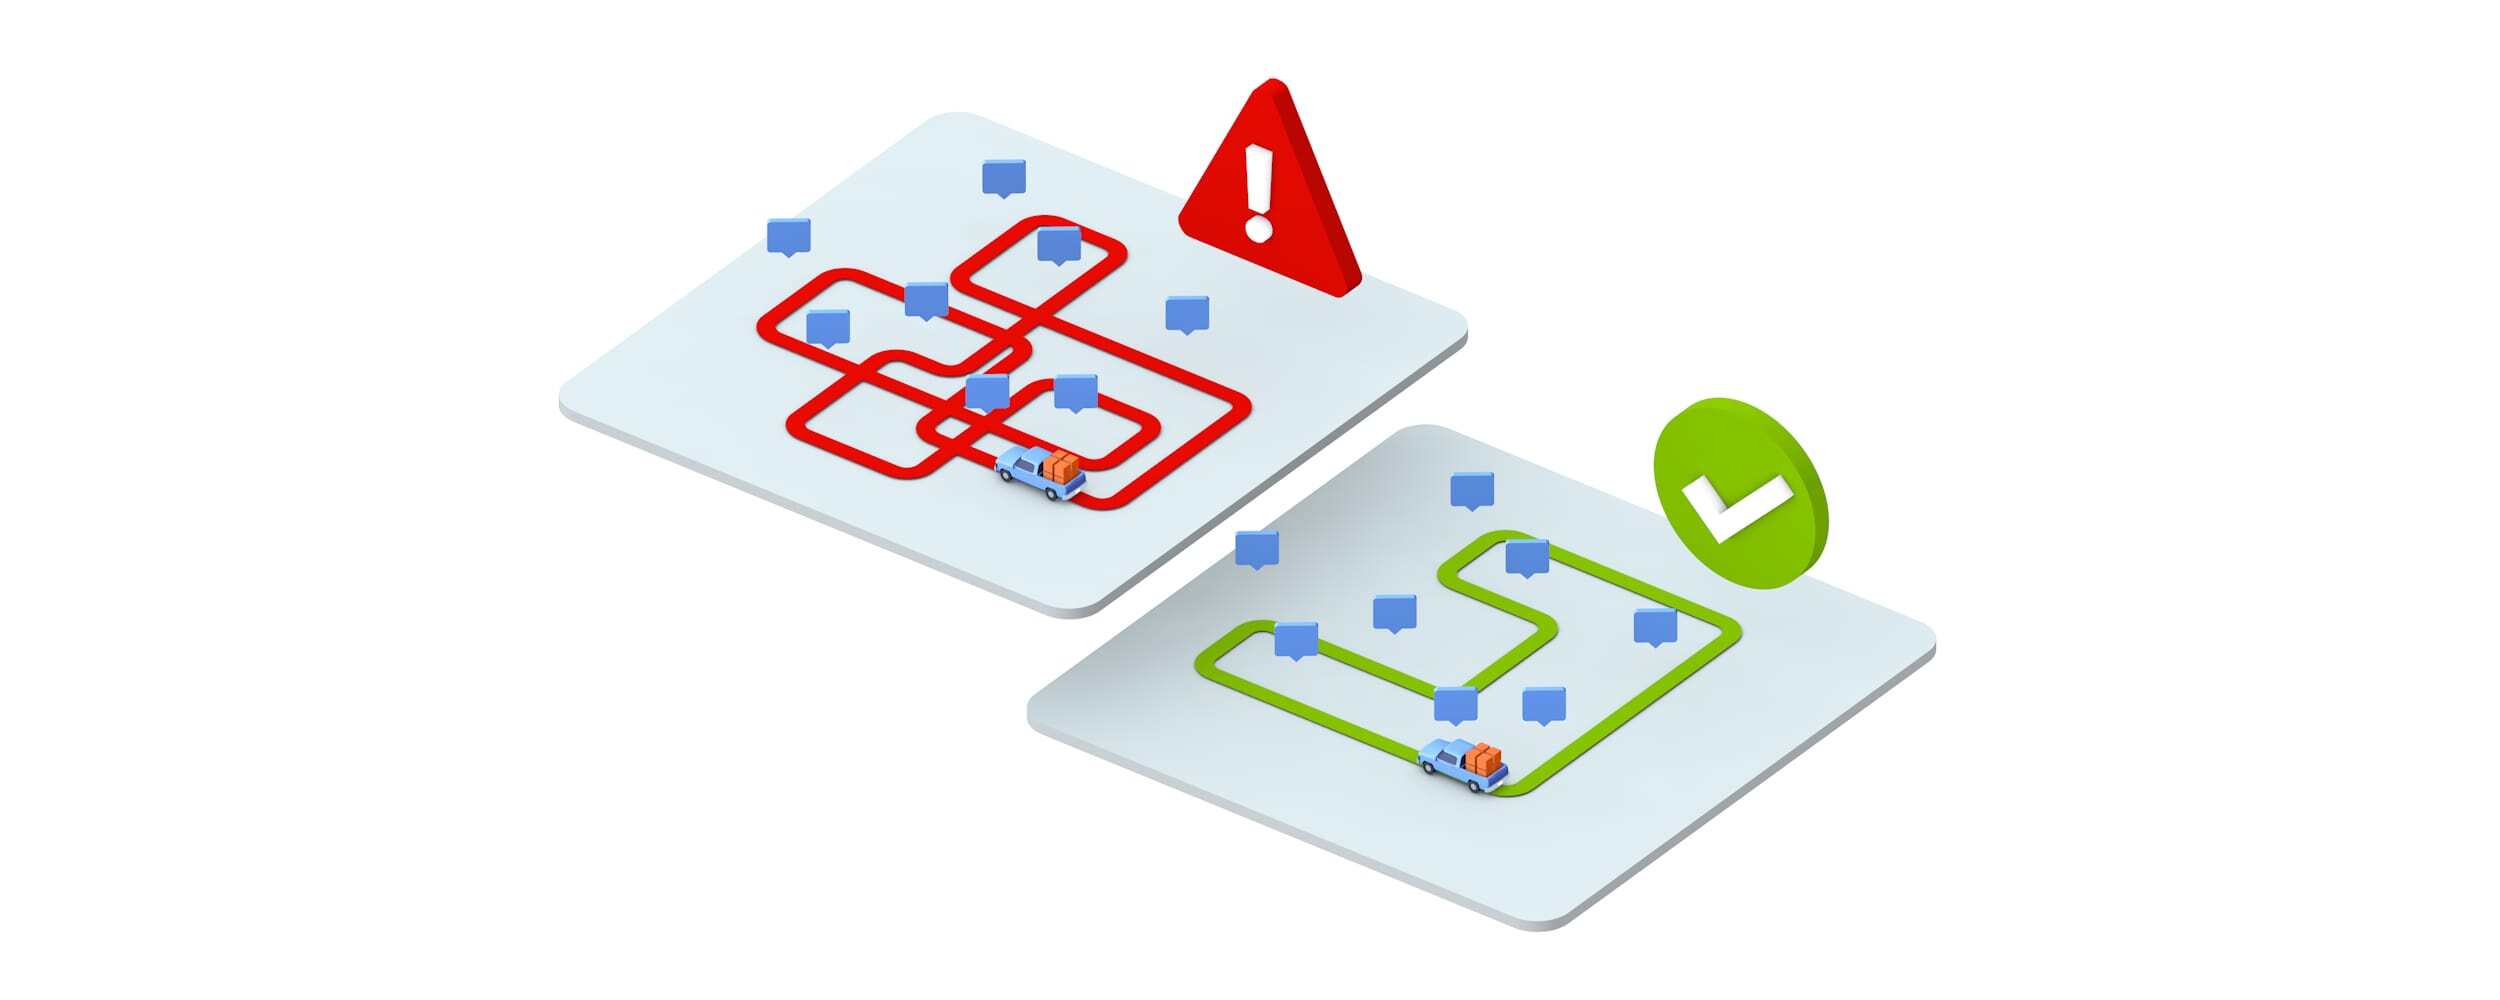 The difference between manually planning routes and using route optimization software.